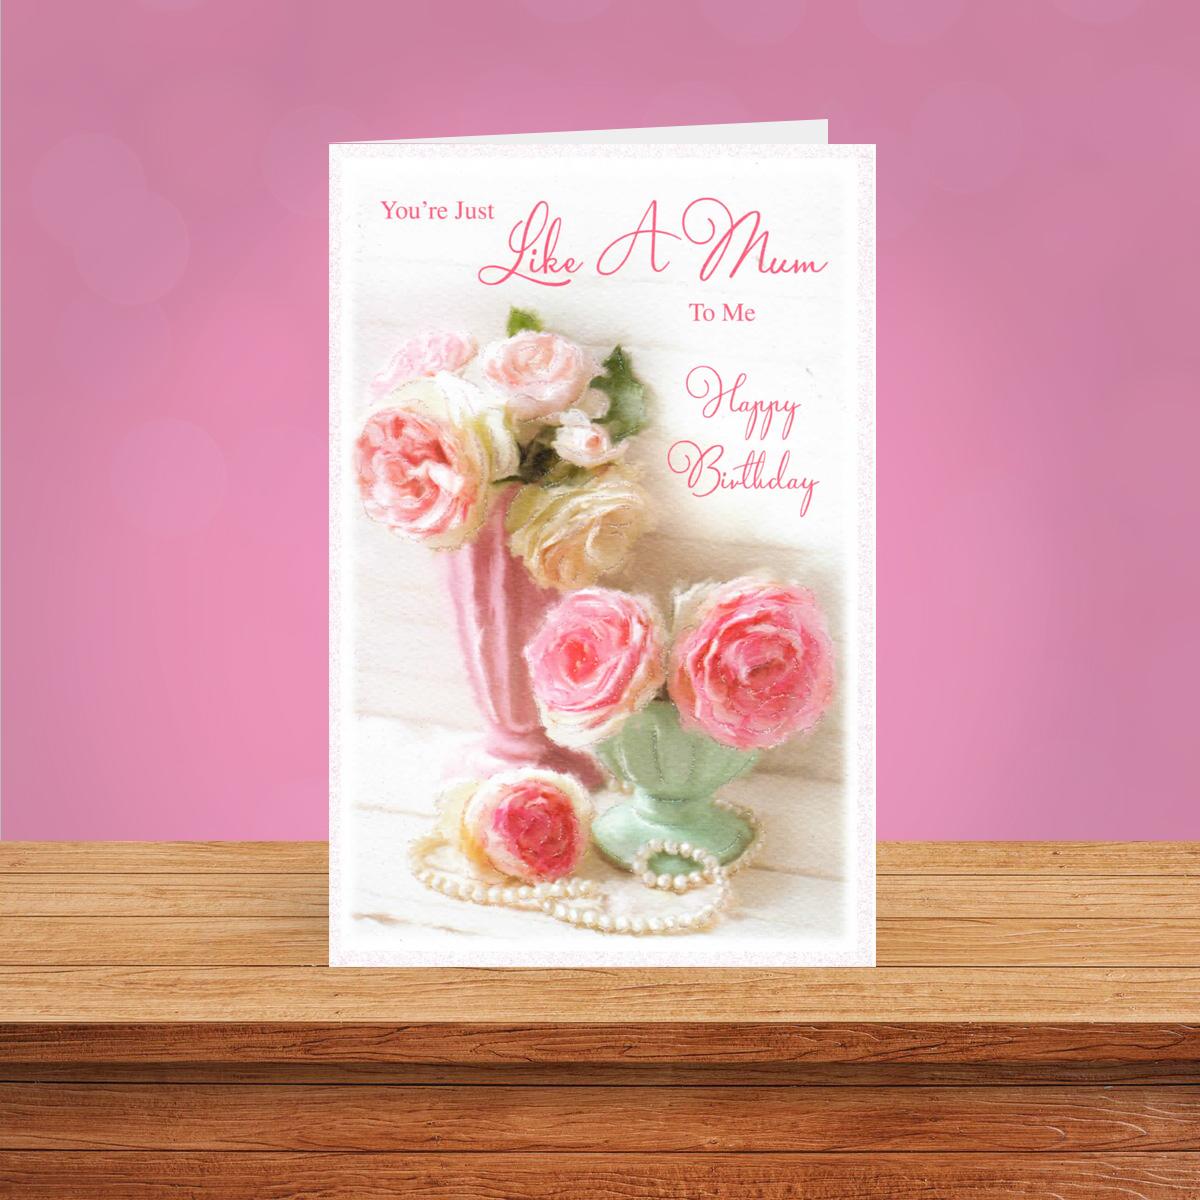 A Selection Of Cards To Show The Depth Of Range In Our Like A Mum Birthday Cards Section